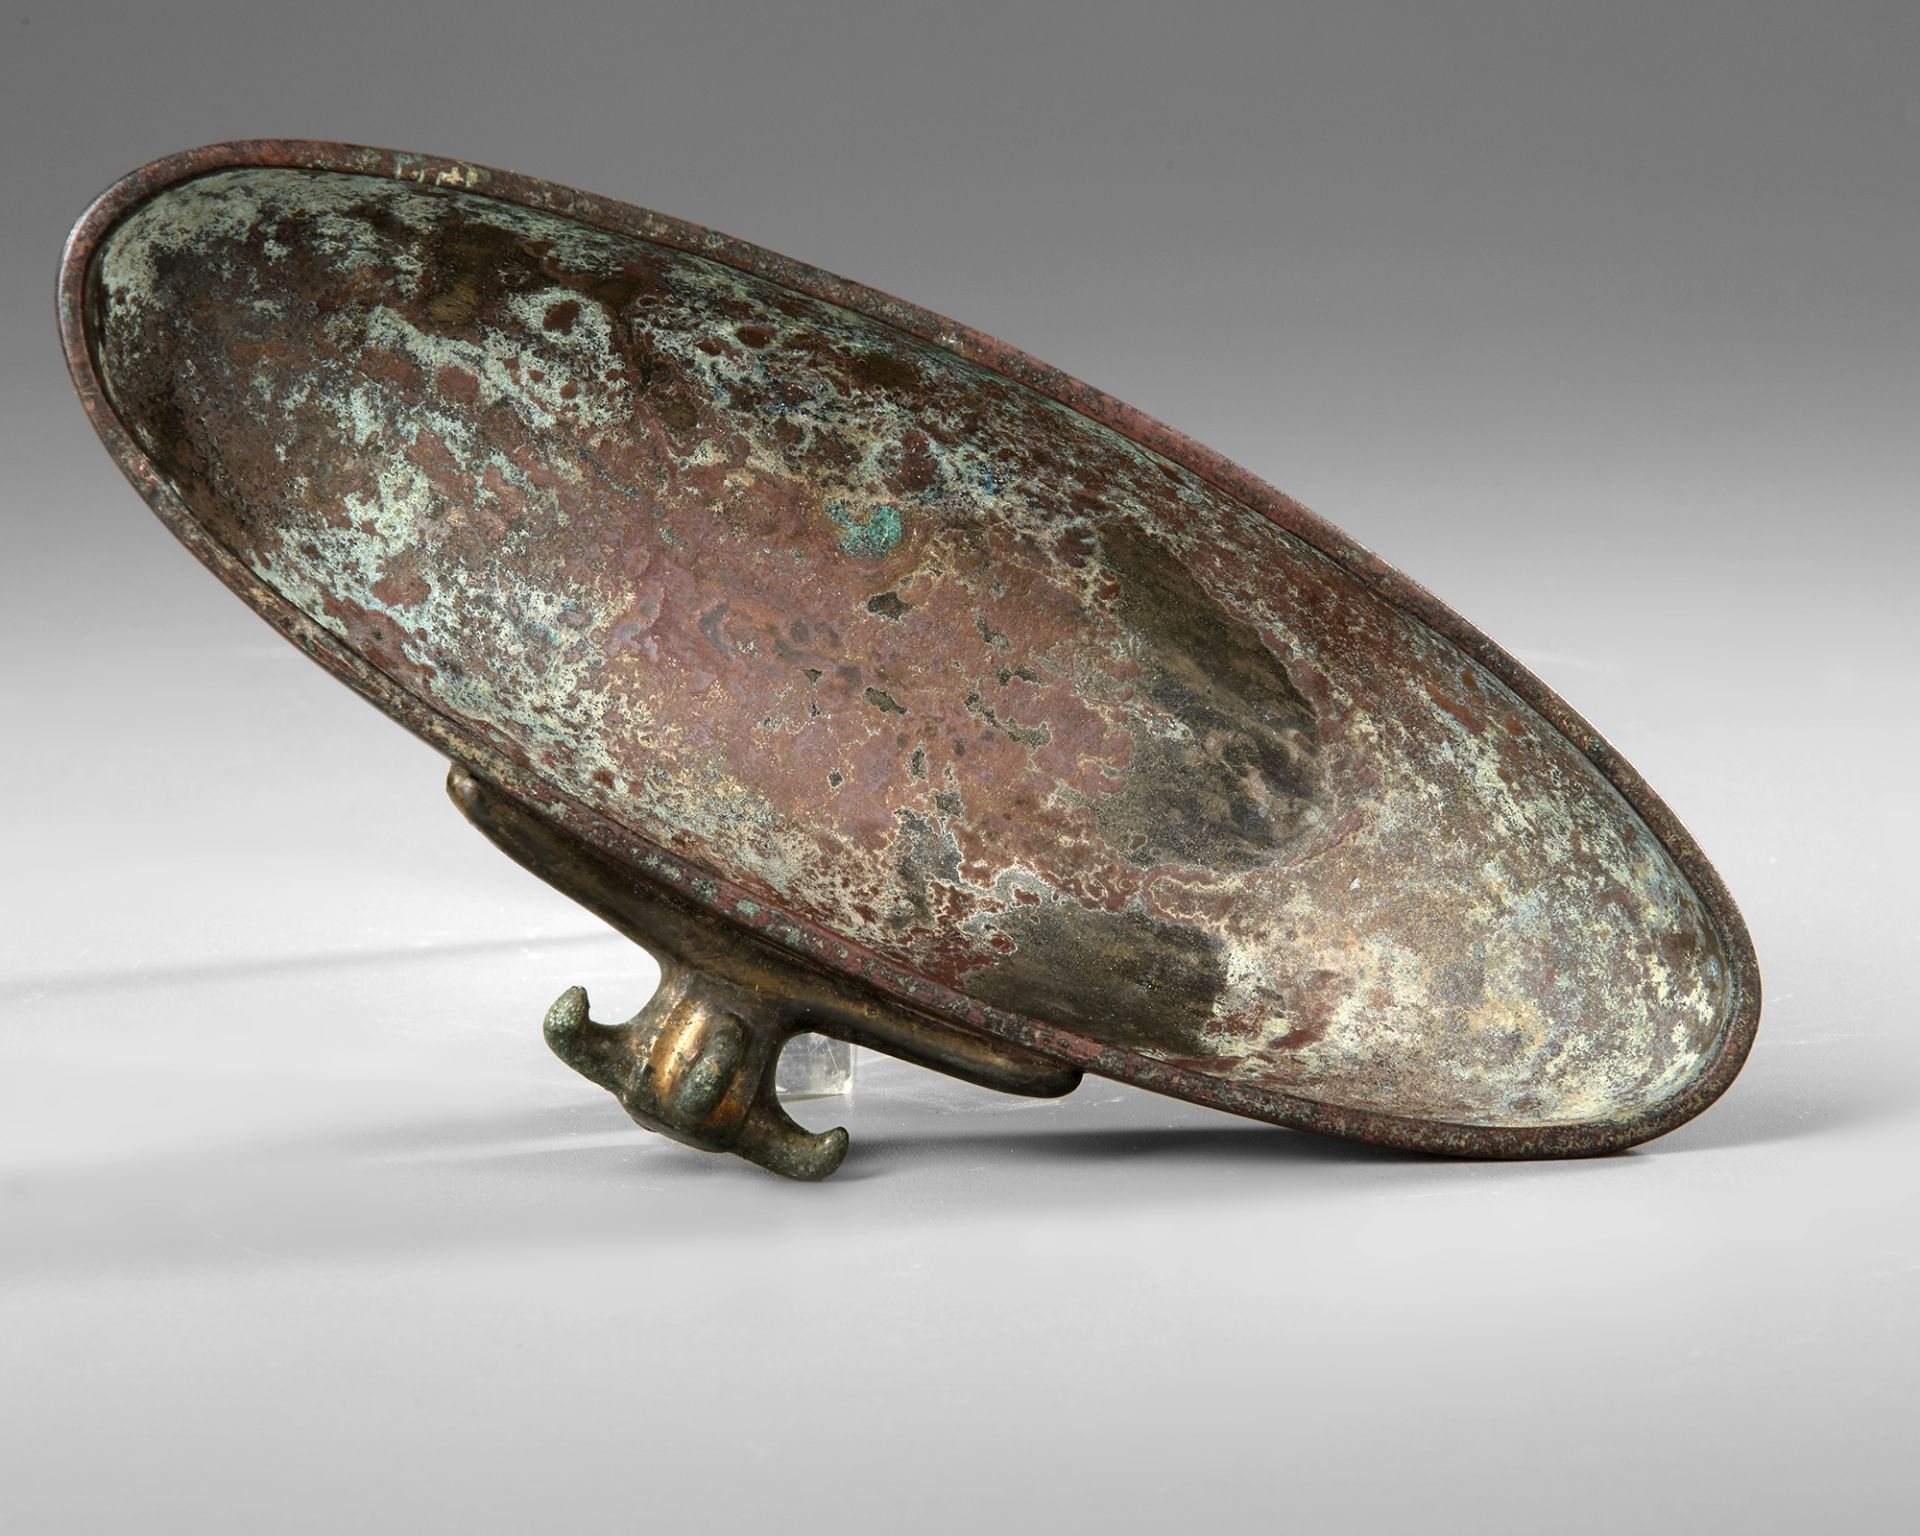 A BRONZE CUP, PHRYGIEN/WEST ASIA, 8TH-6TH CENTURY BC - Image 4 of 4